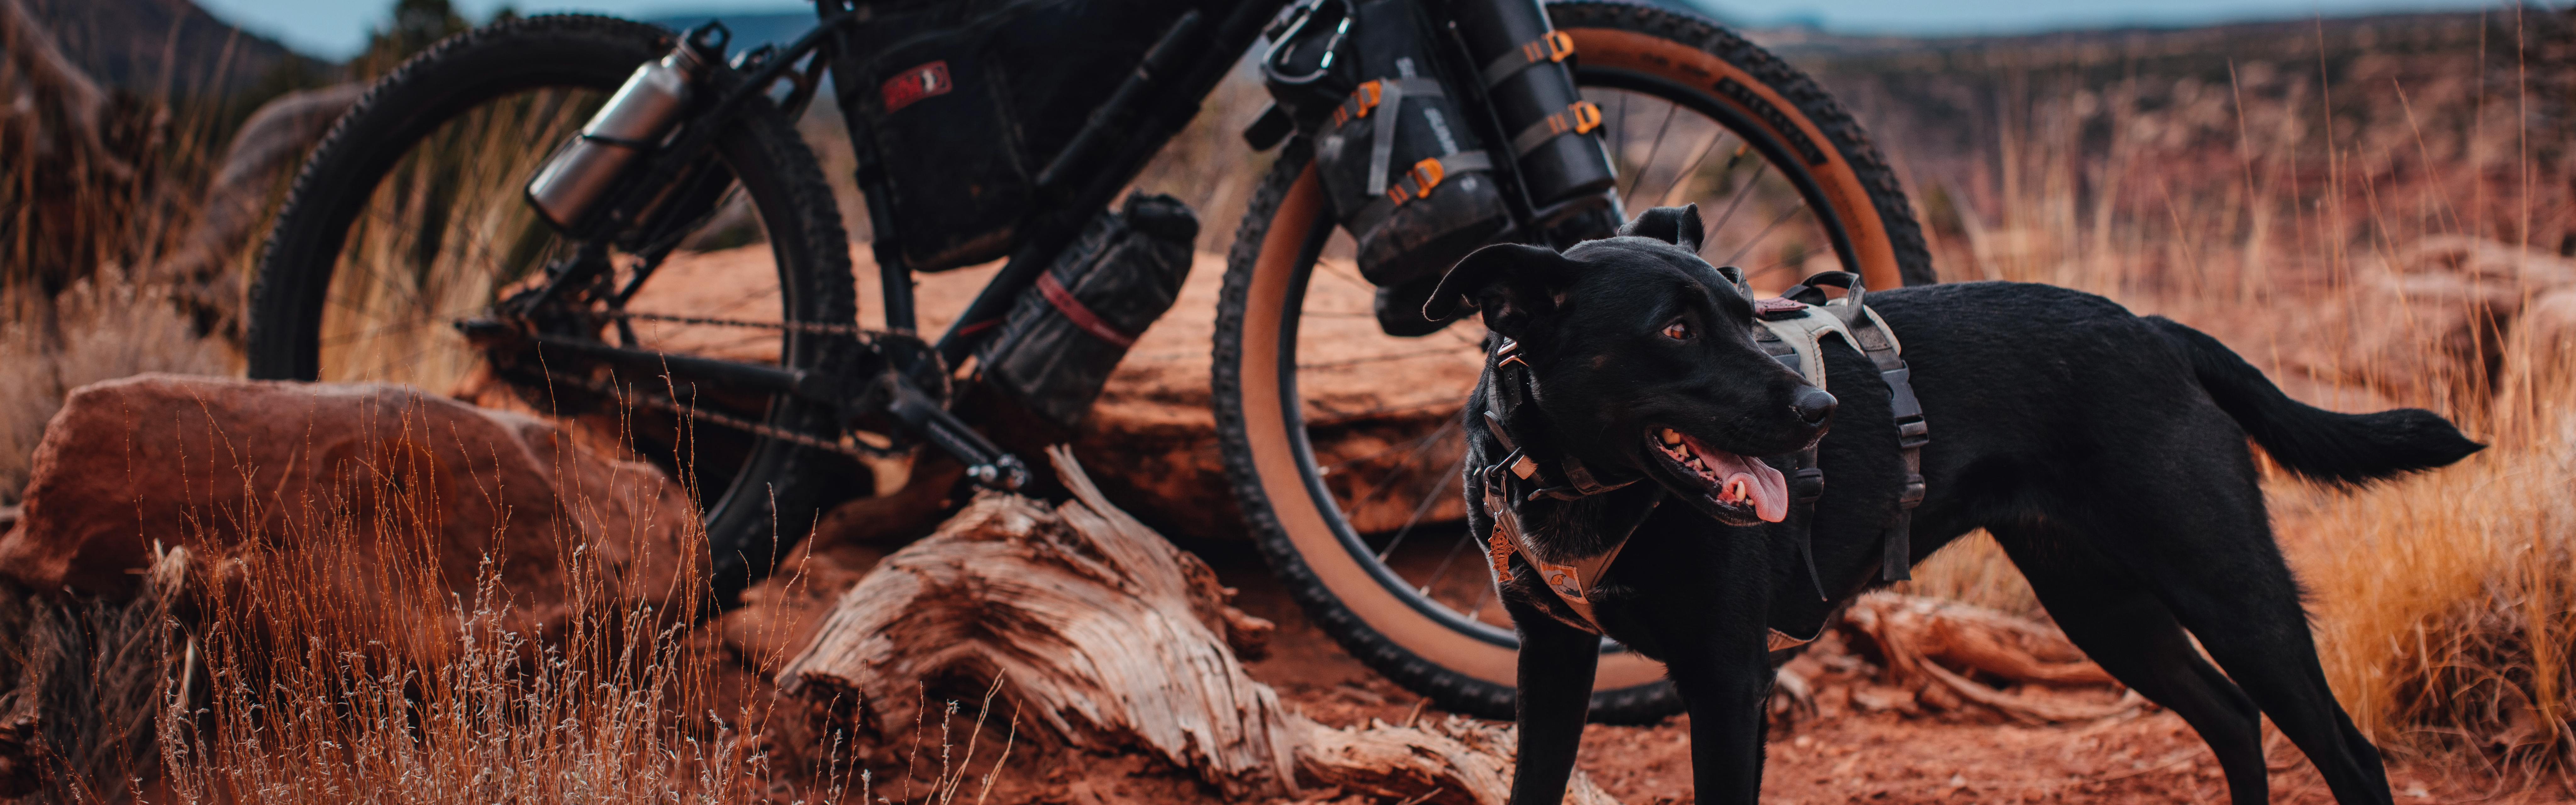 Dog standing in front of a mountain bike